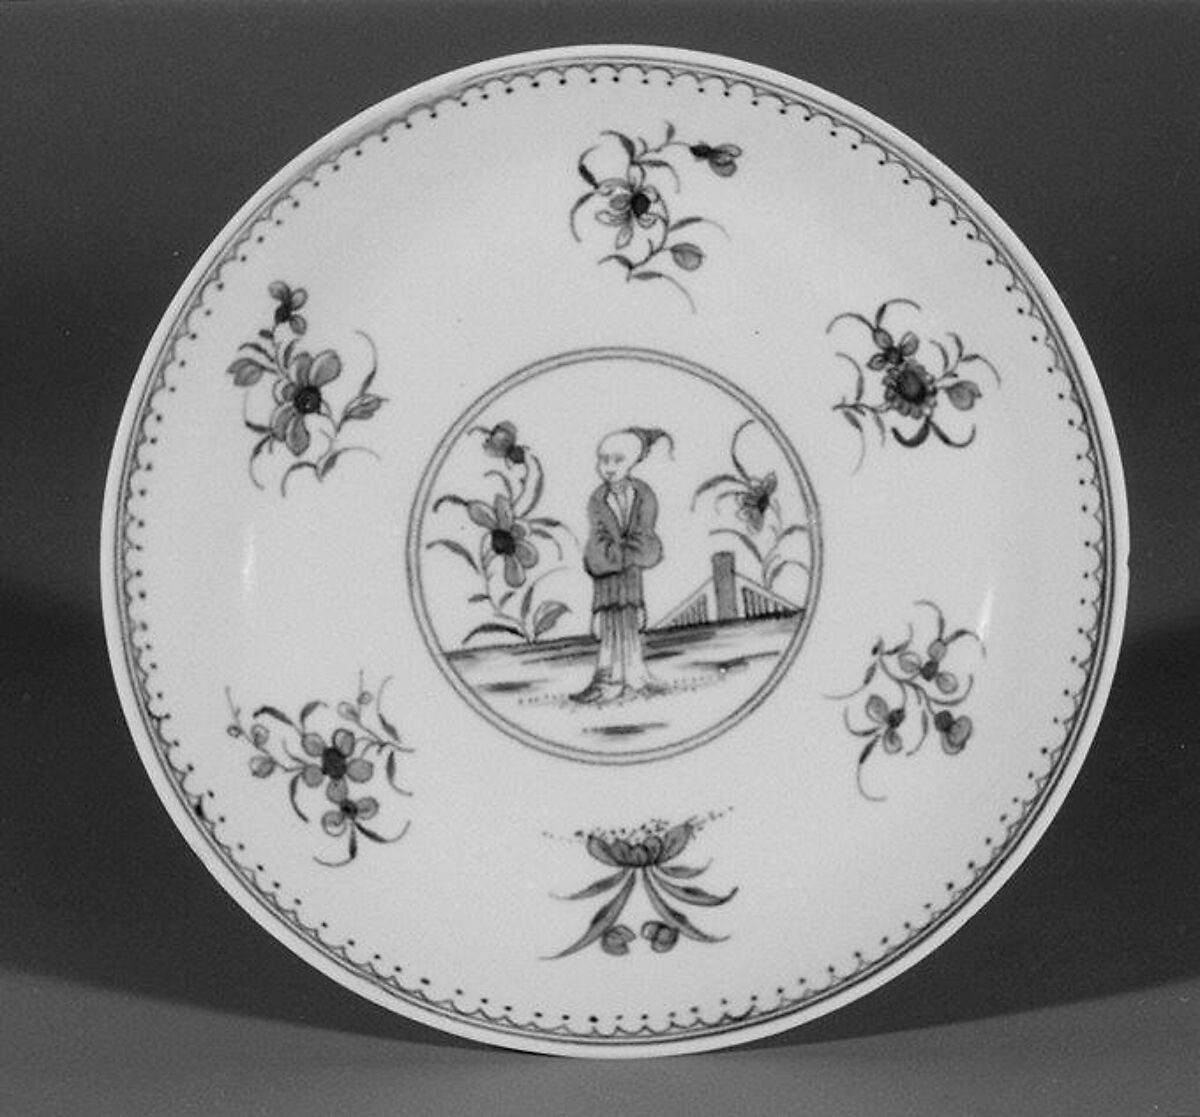 Two saucers (part of a service), Worcester factory (British, 1751–2008), Soft-paste porcelain, British, Worcester 